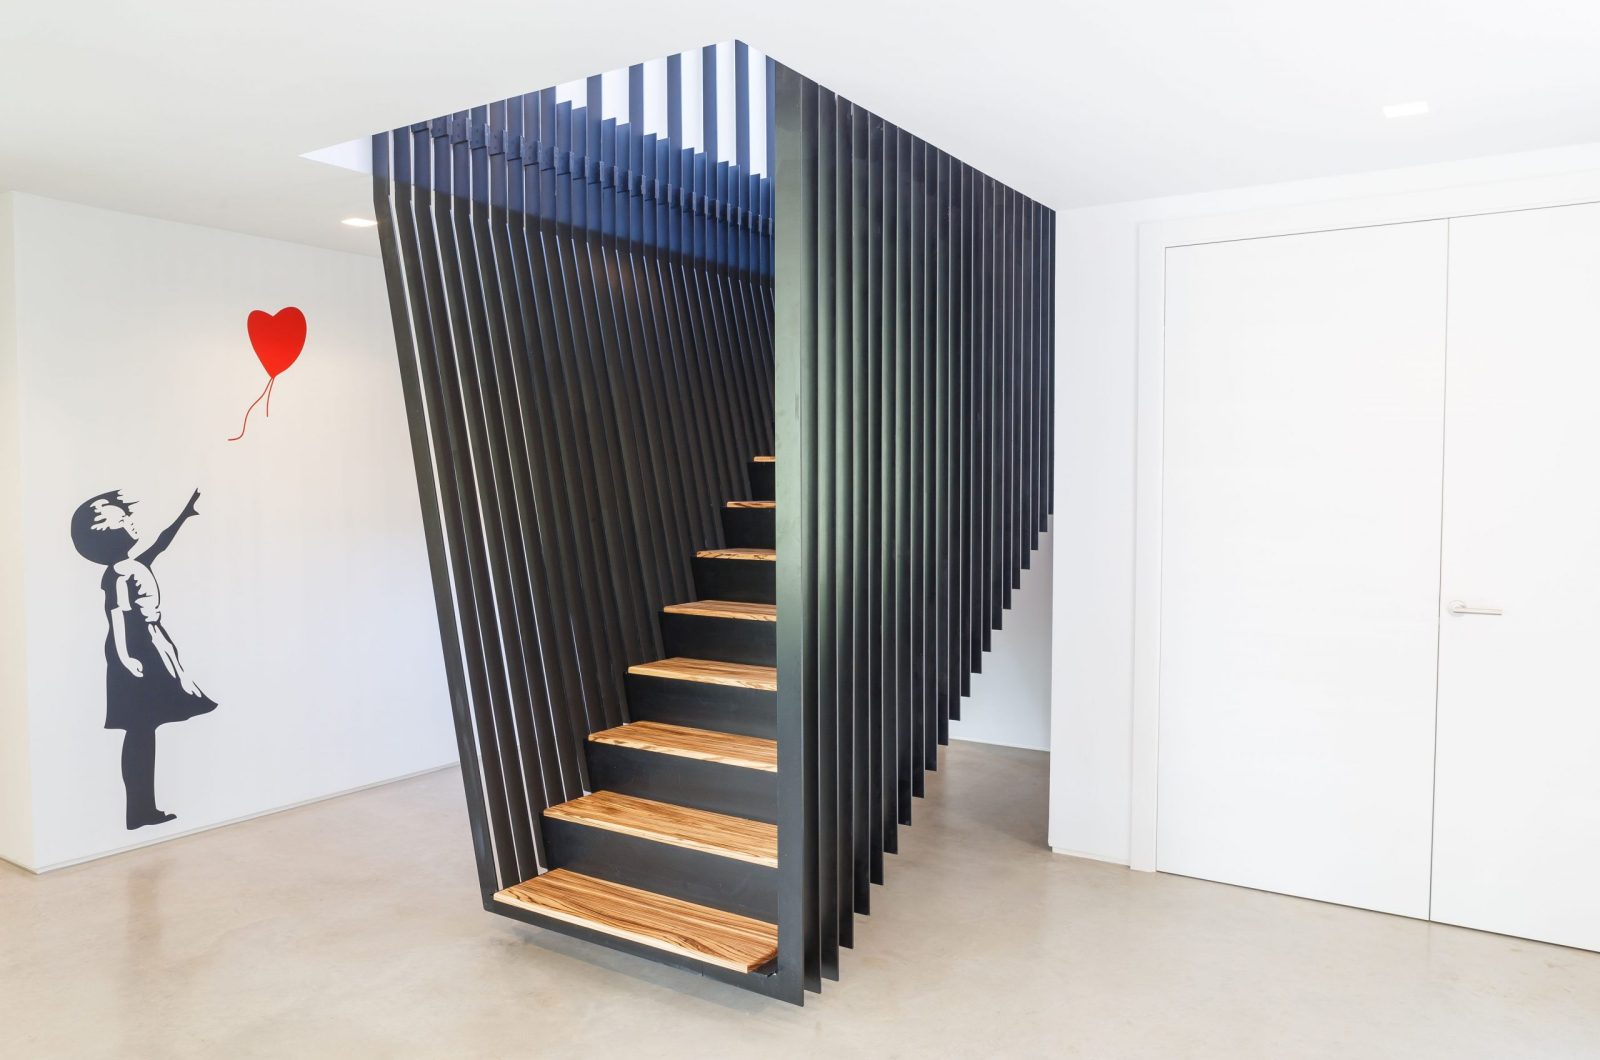 Studio Spicer project modular metal staircase with Banksy inspired mural on the wall